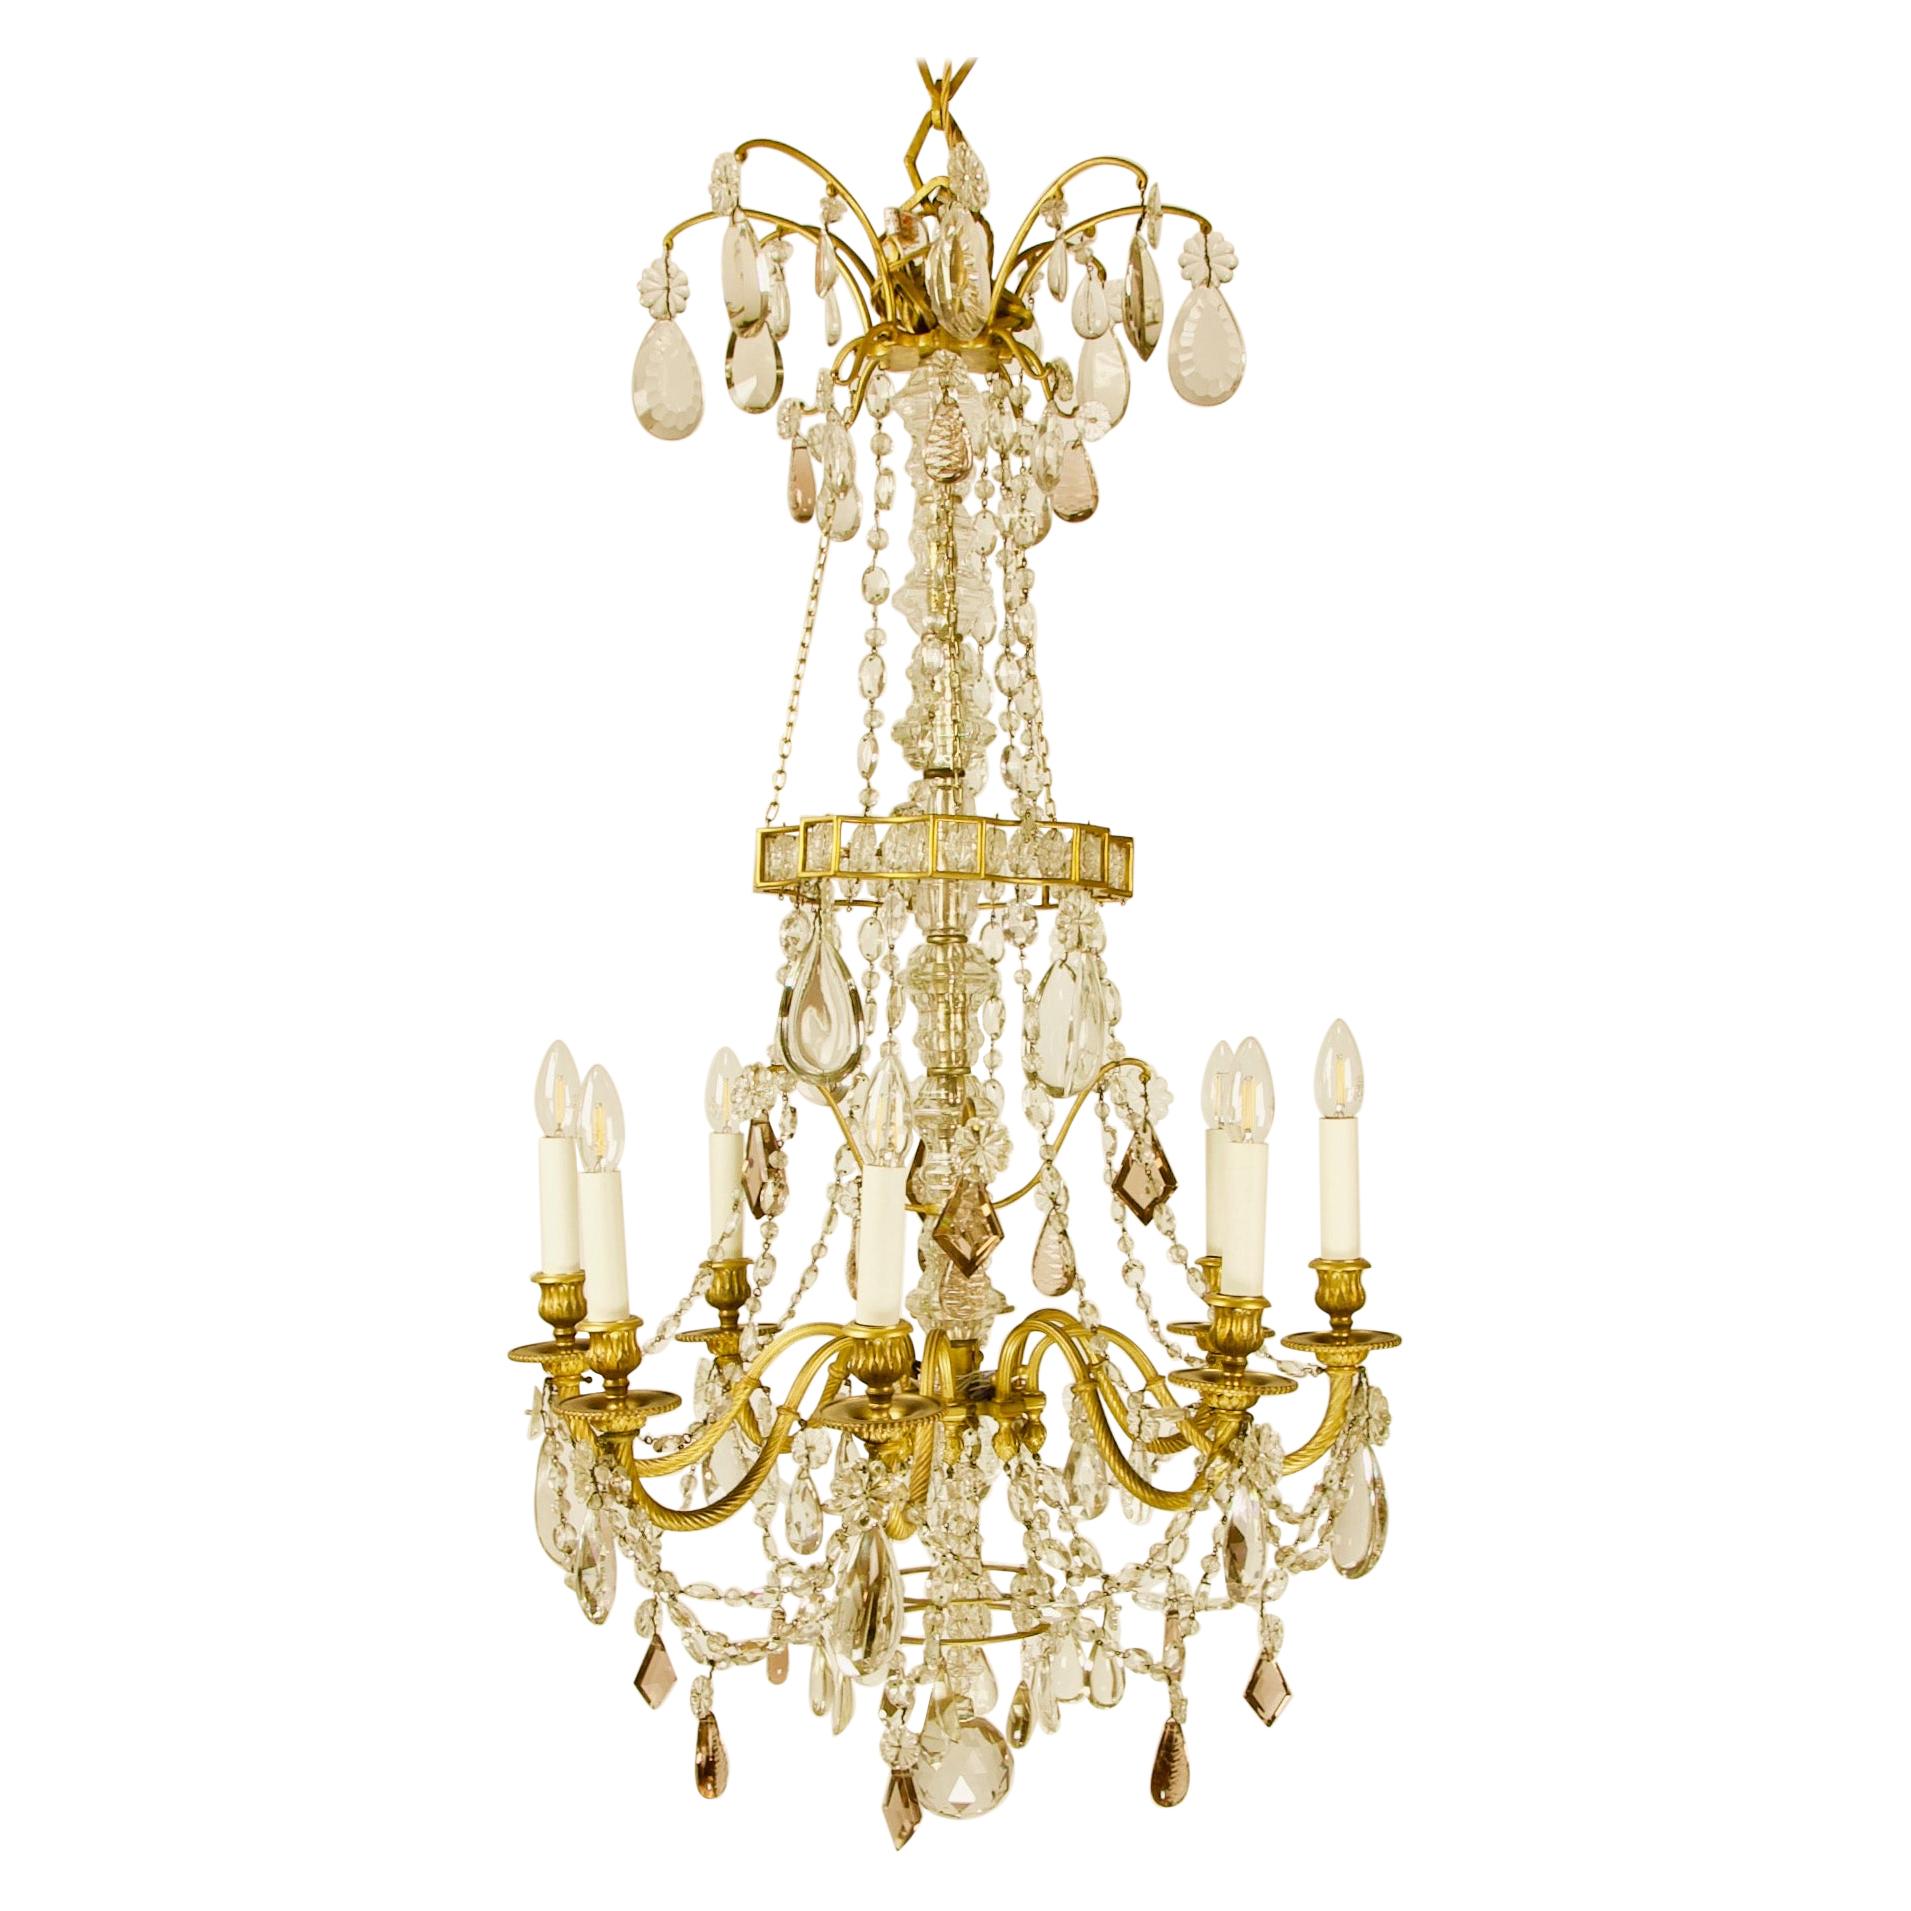 French Crystal-Cut and Gilt Bronze Louis XVI Chandelier Attr. to Maison Baguès